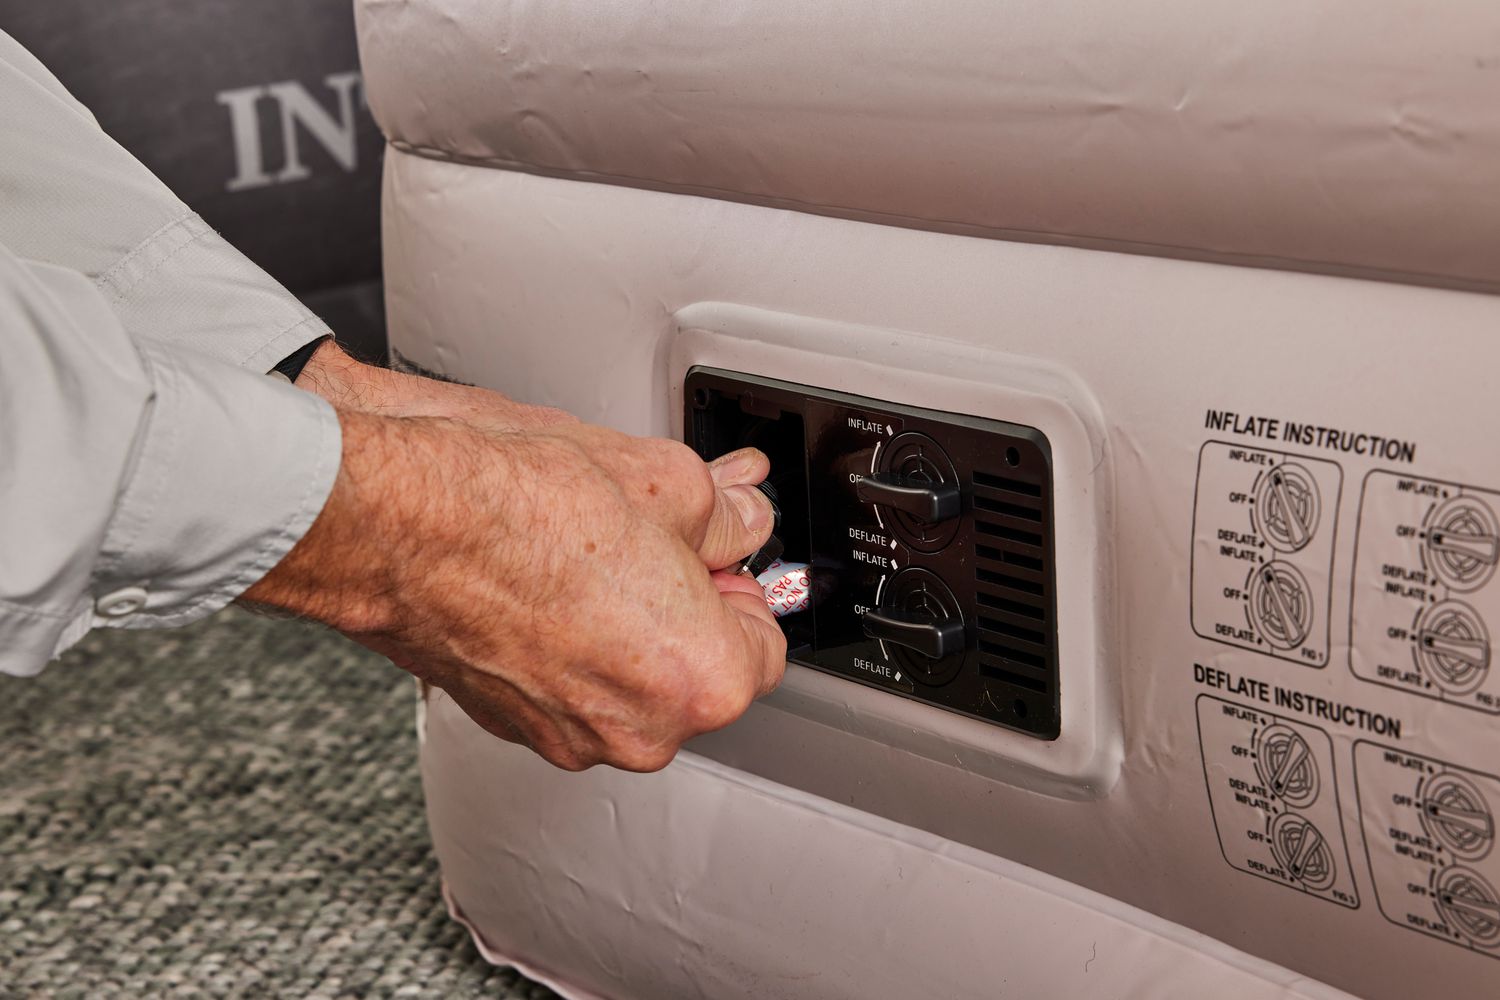 A person plugs in the Chillsun Twin Air Mattress